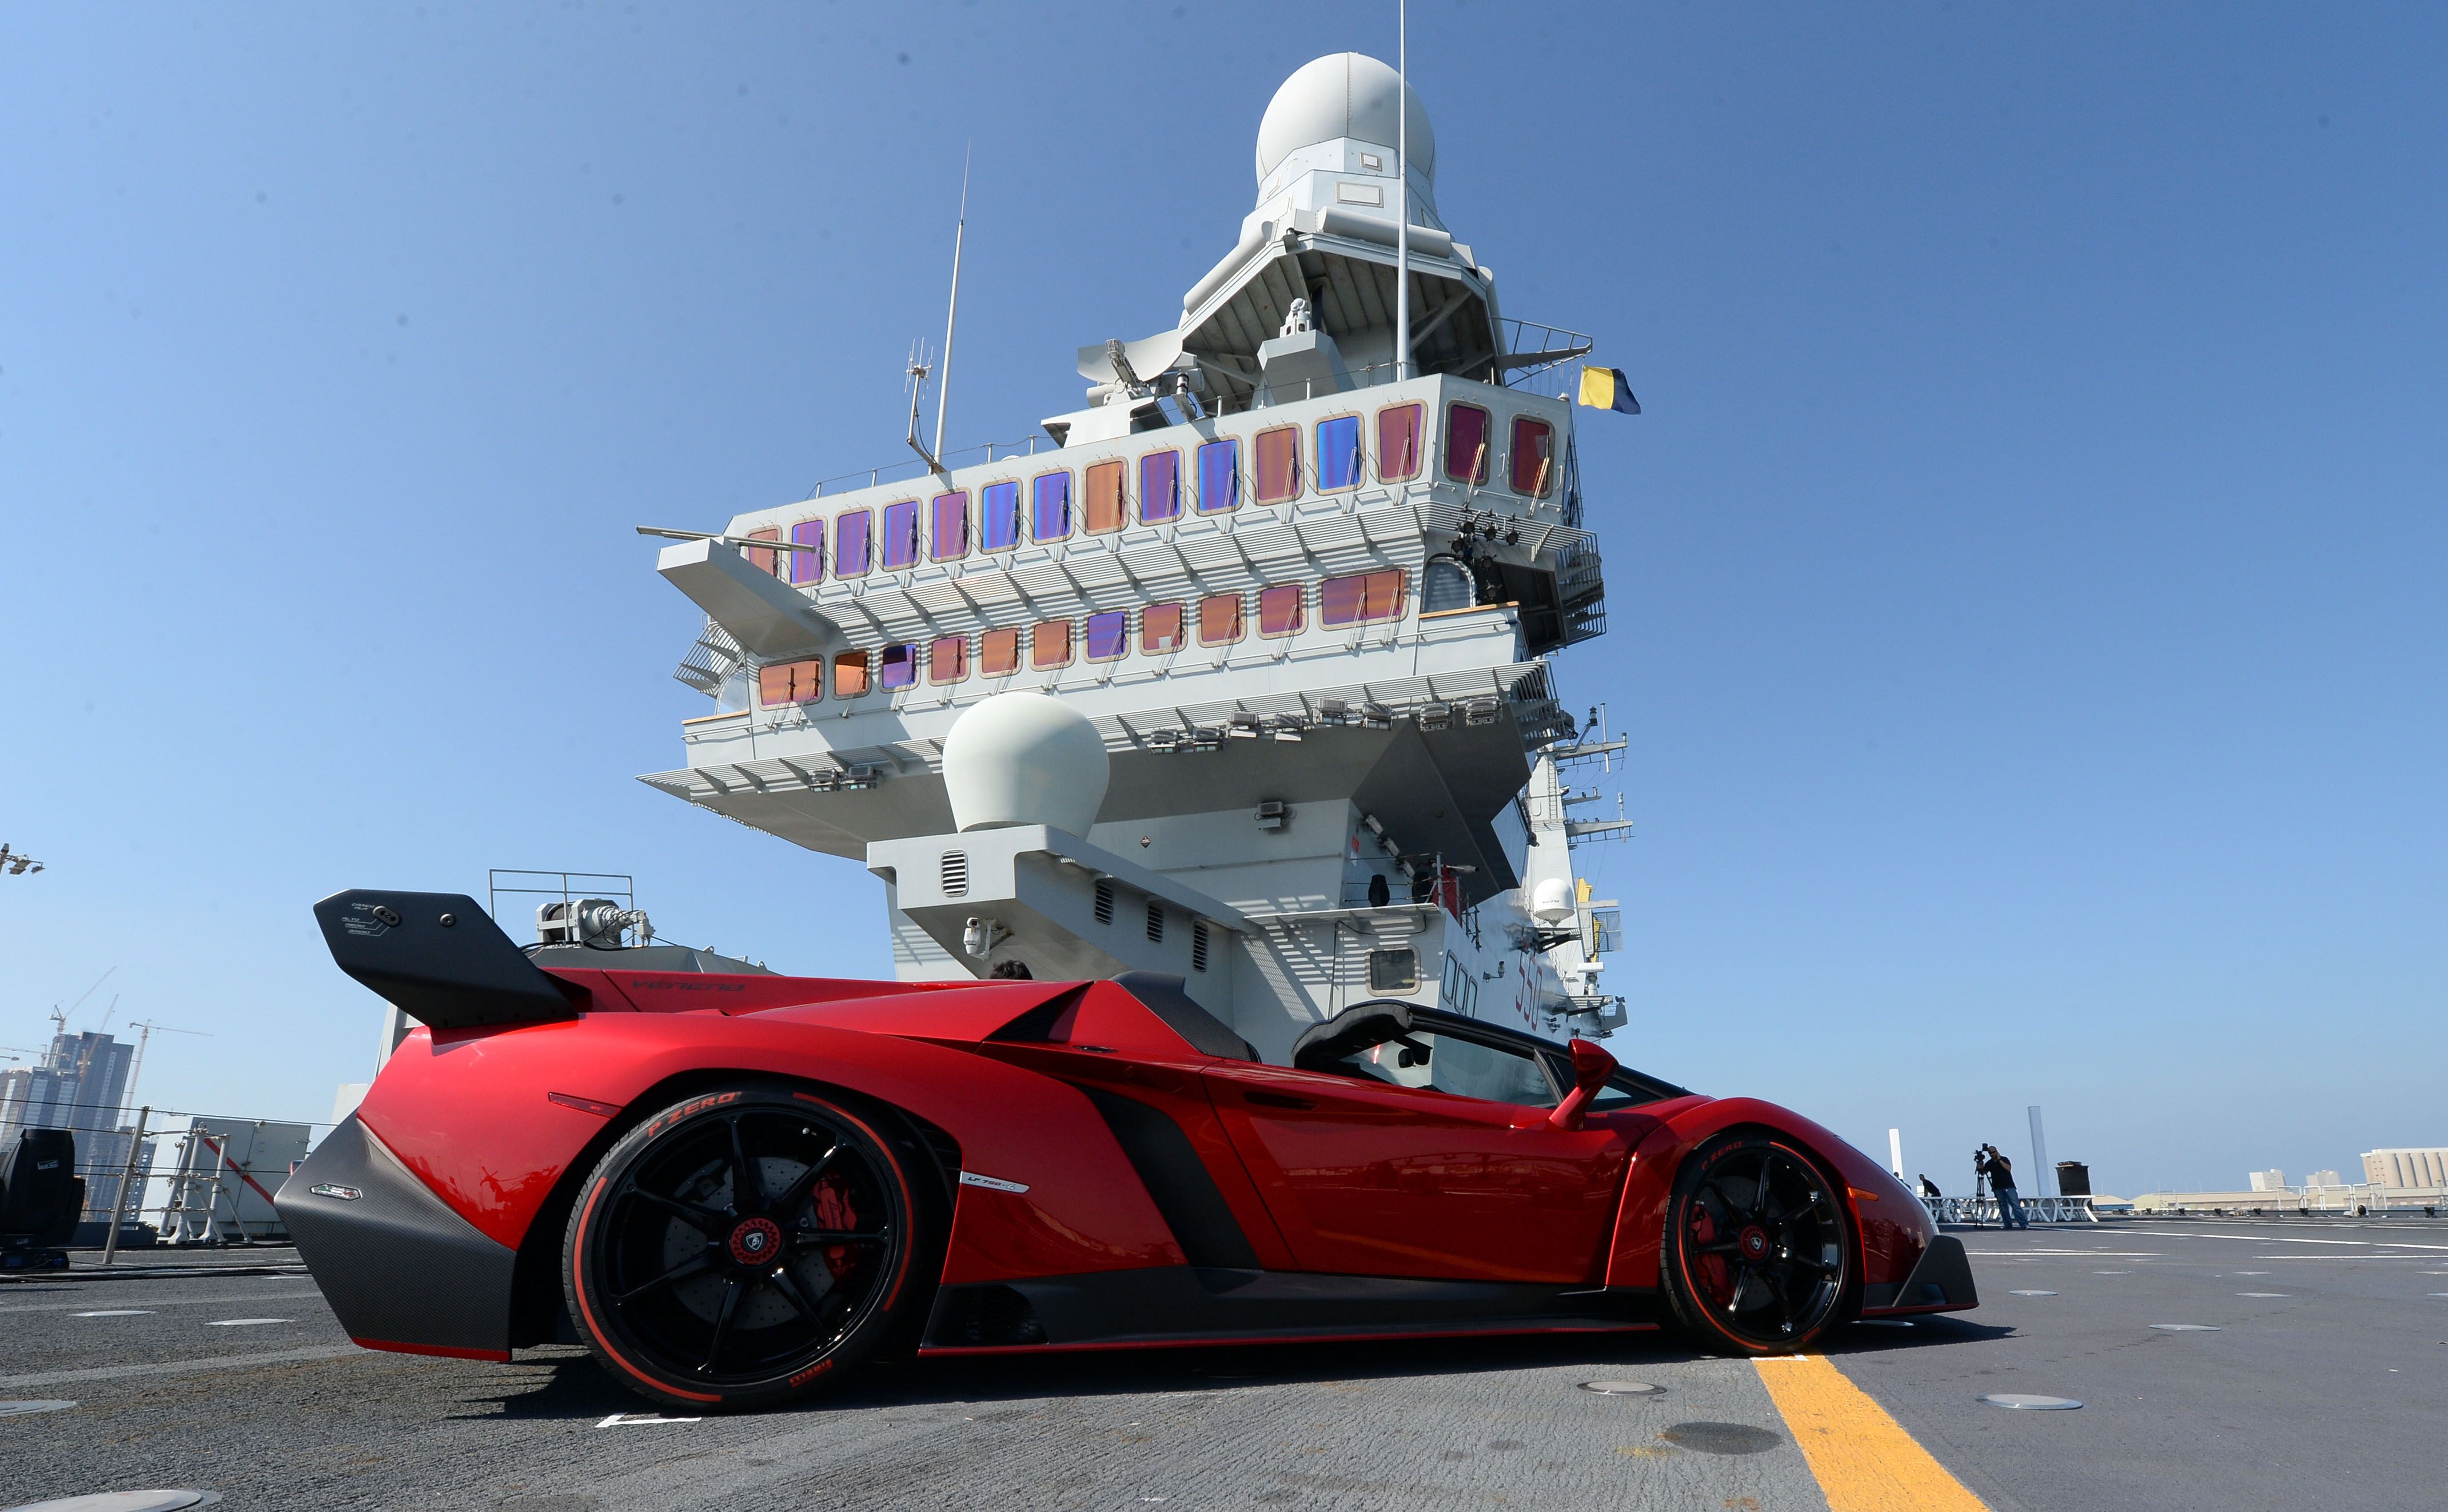 A red Lamborghini Veneno with black highlights, facing right on the deck of the Cavour ship.